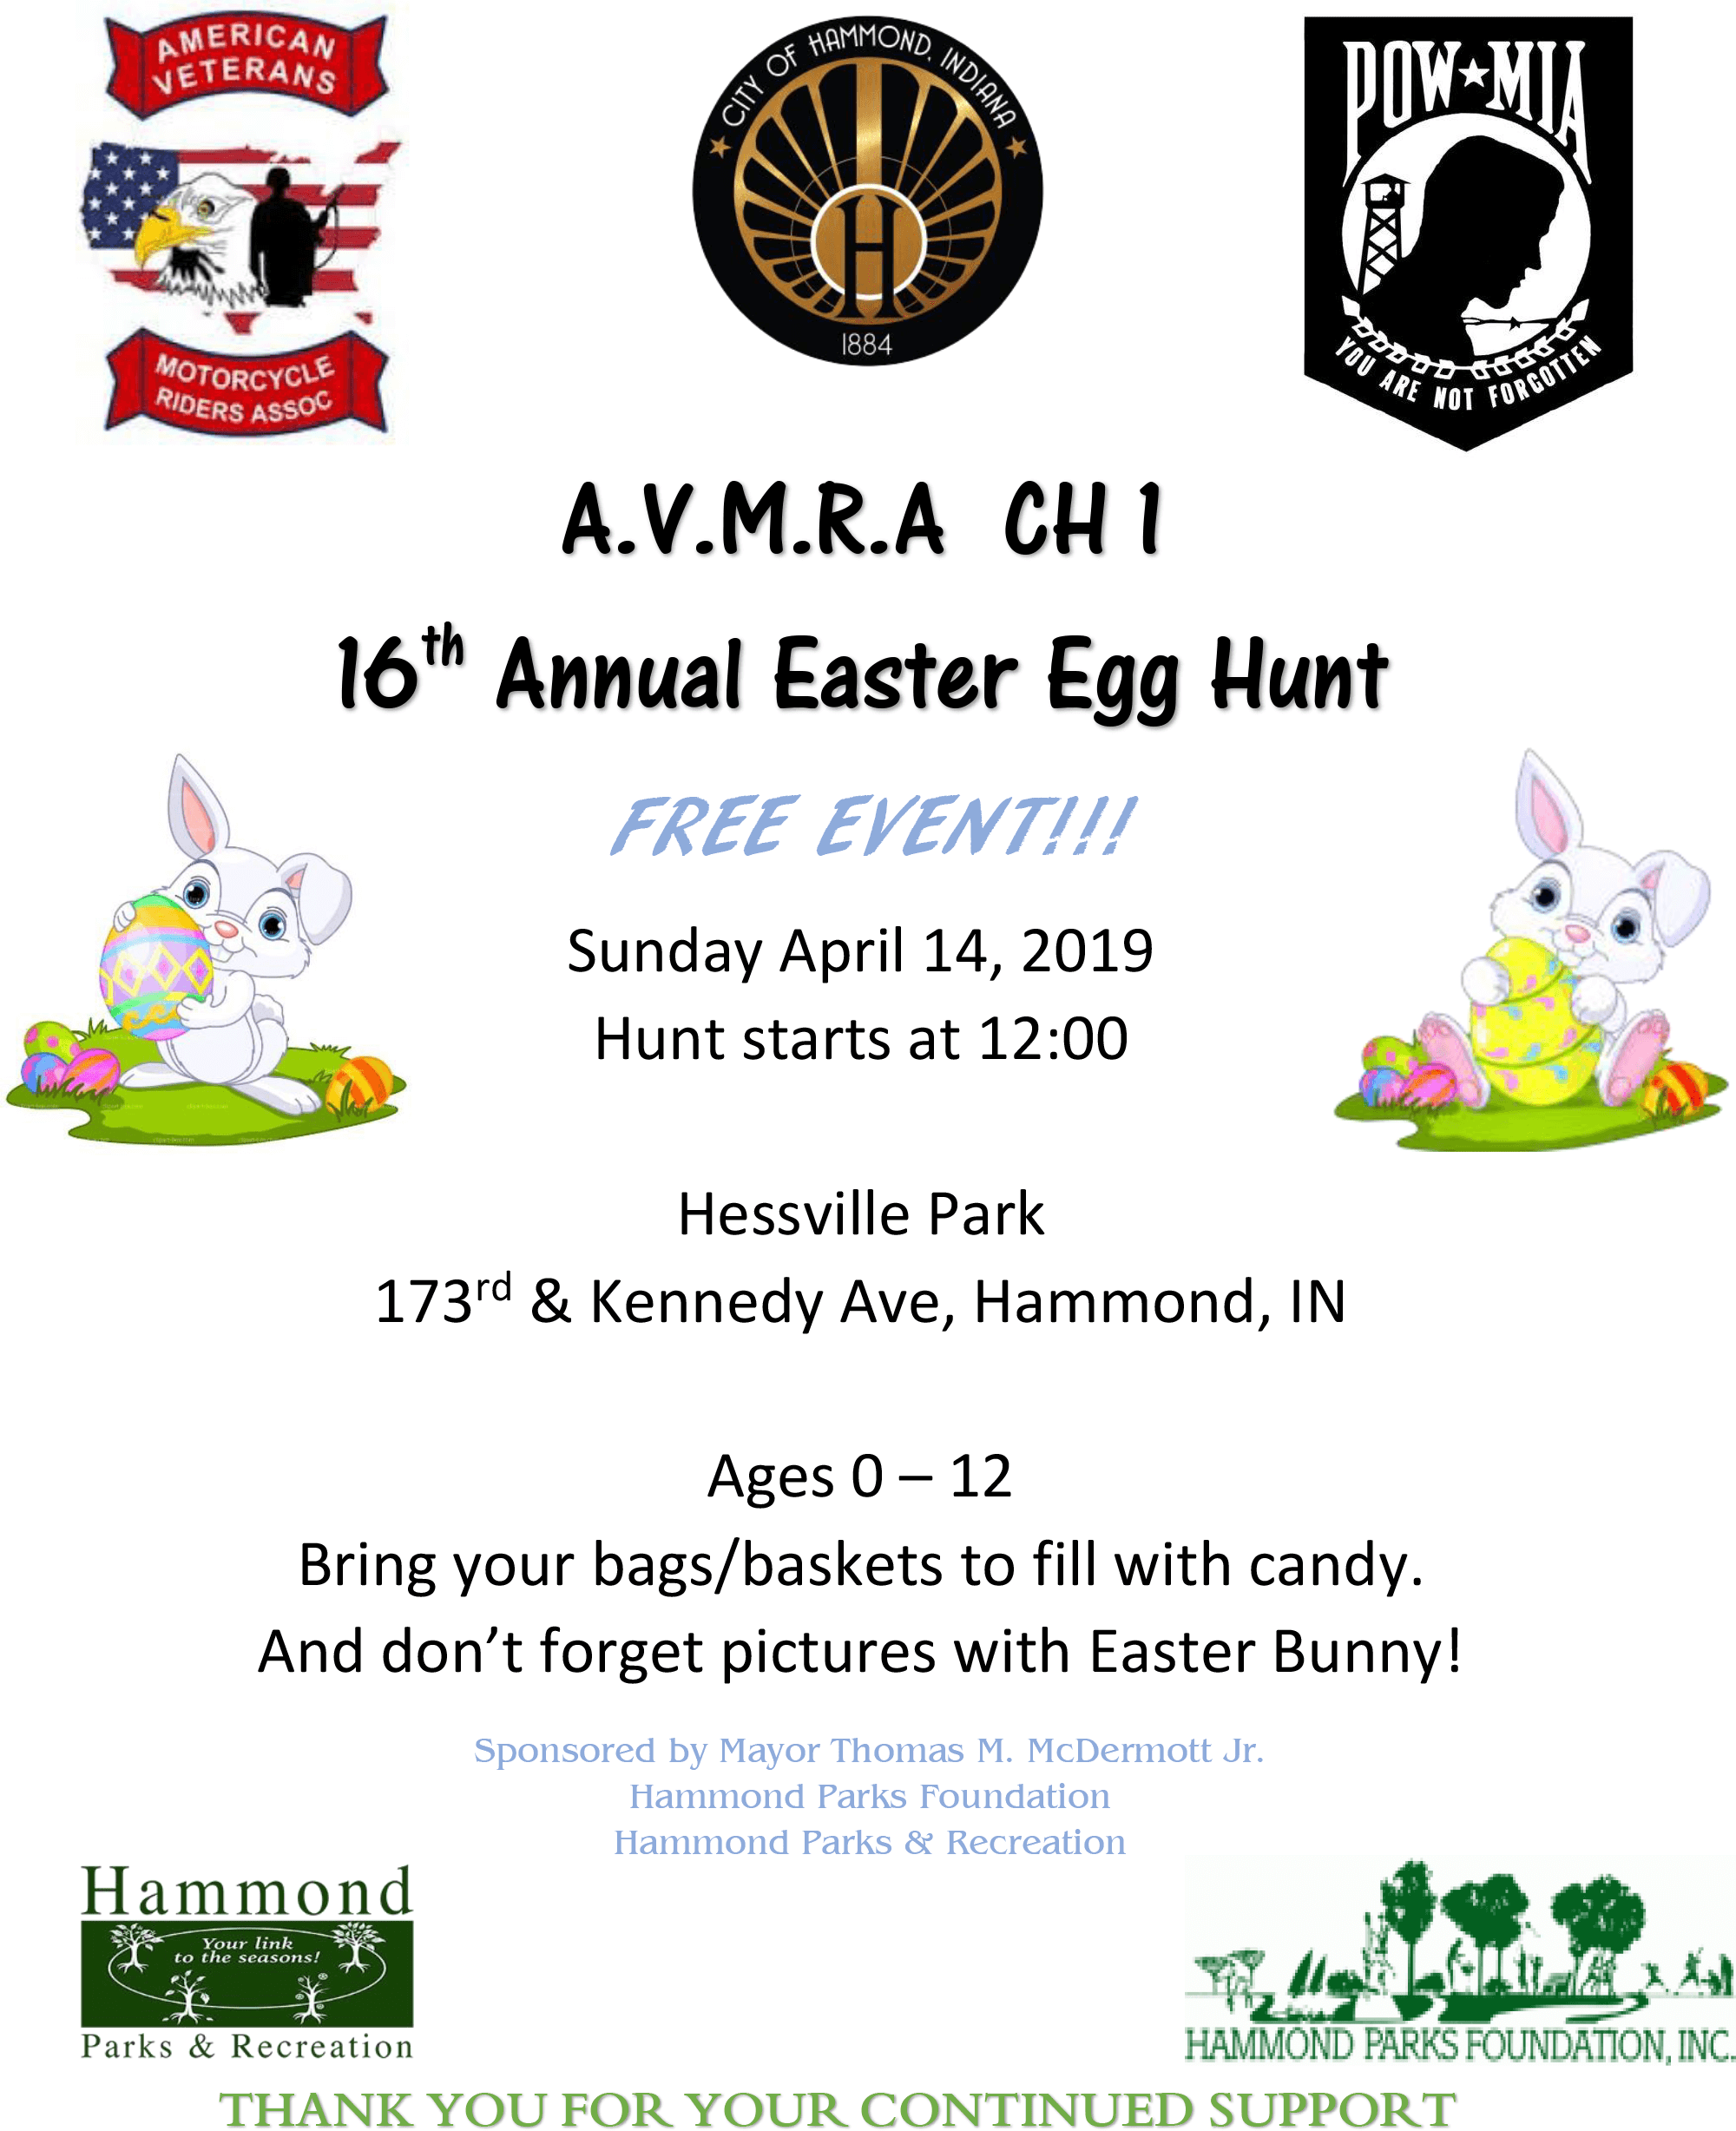 American Veterans Motorcycle Riders Association, Hammond Parks & Recreation and Hammond Parks Foundation invite you to attend our 16th Annual Easter Egg Hunt.